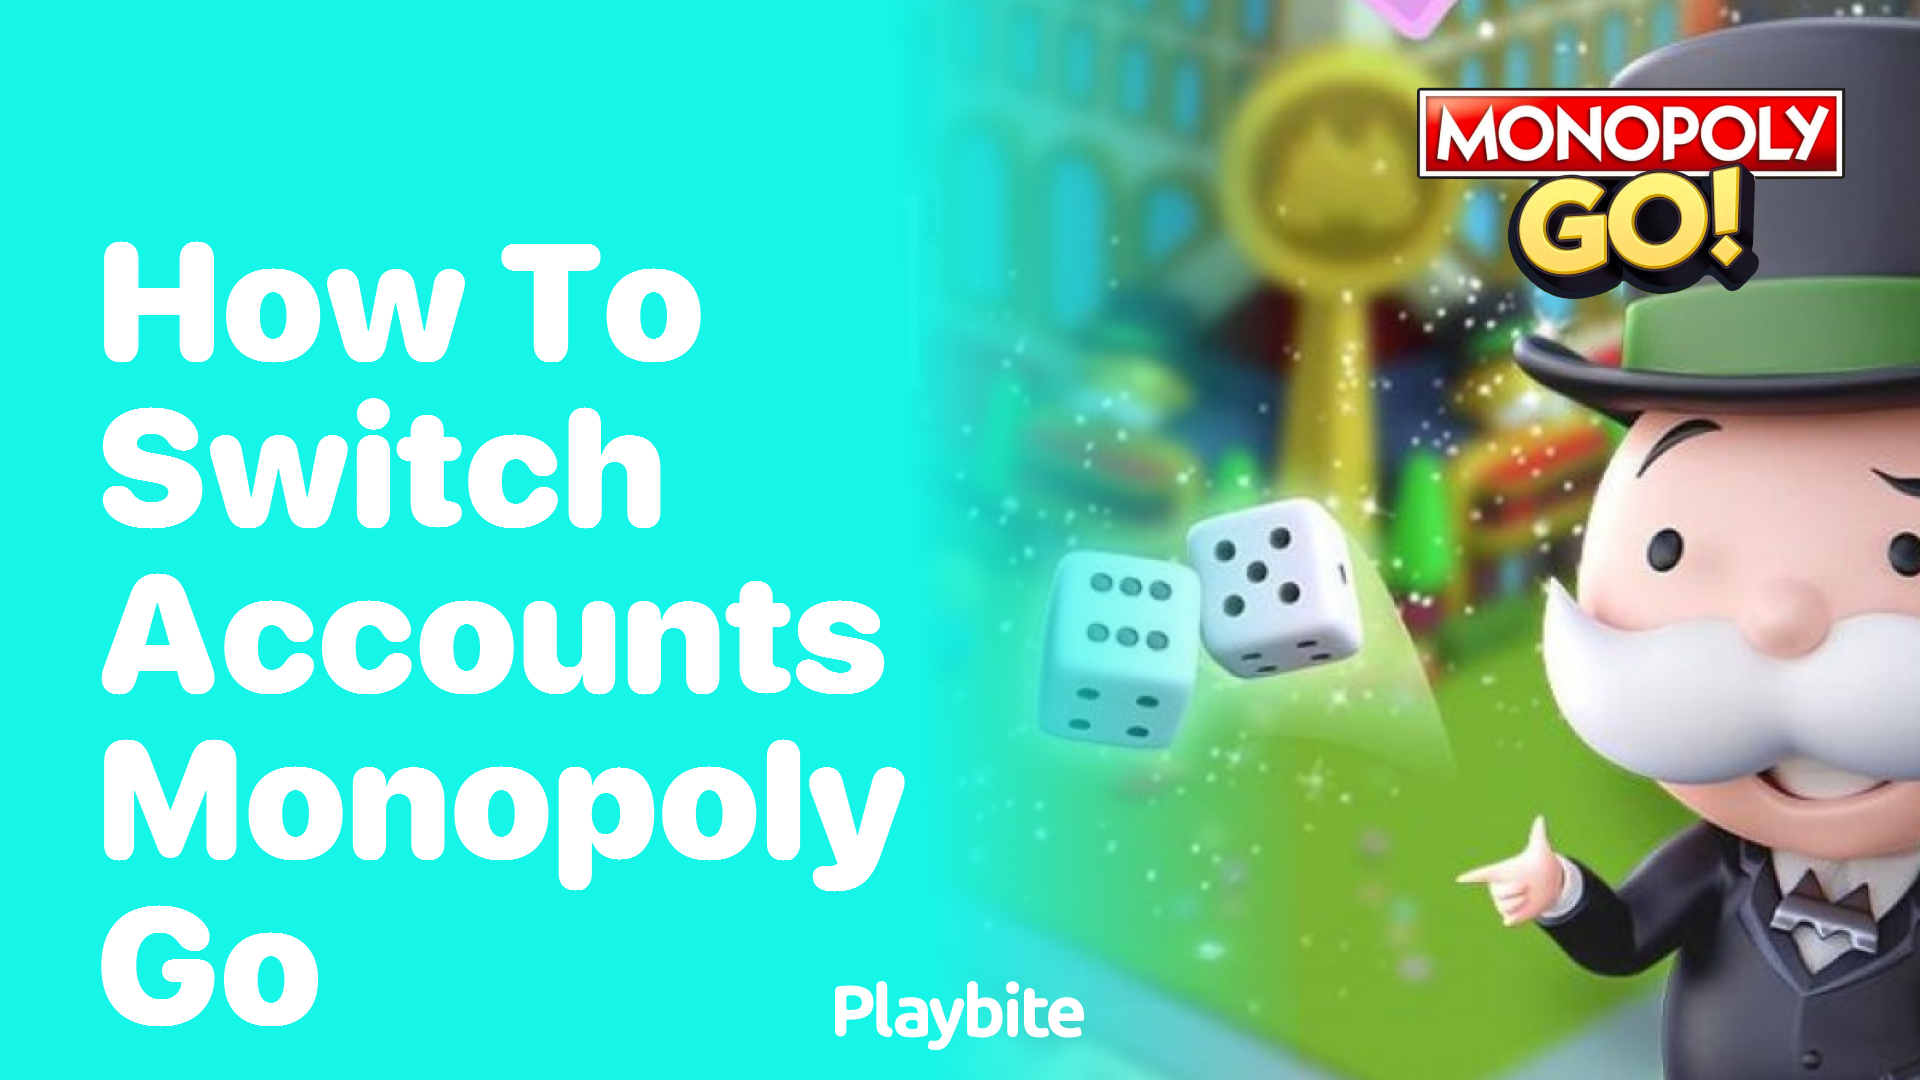 How to Switch Accounts in Monopoly Go: A Quick Guide